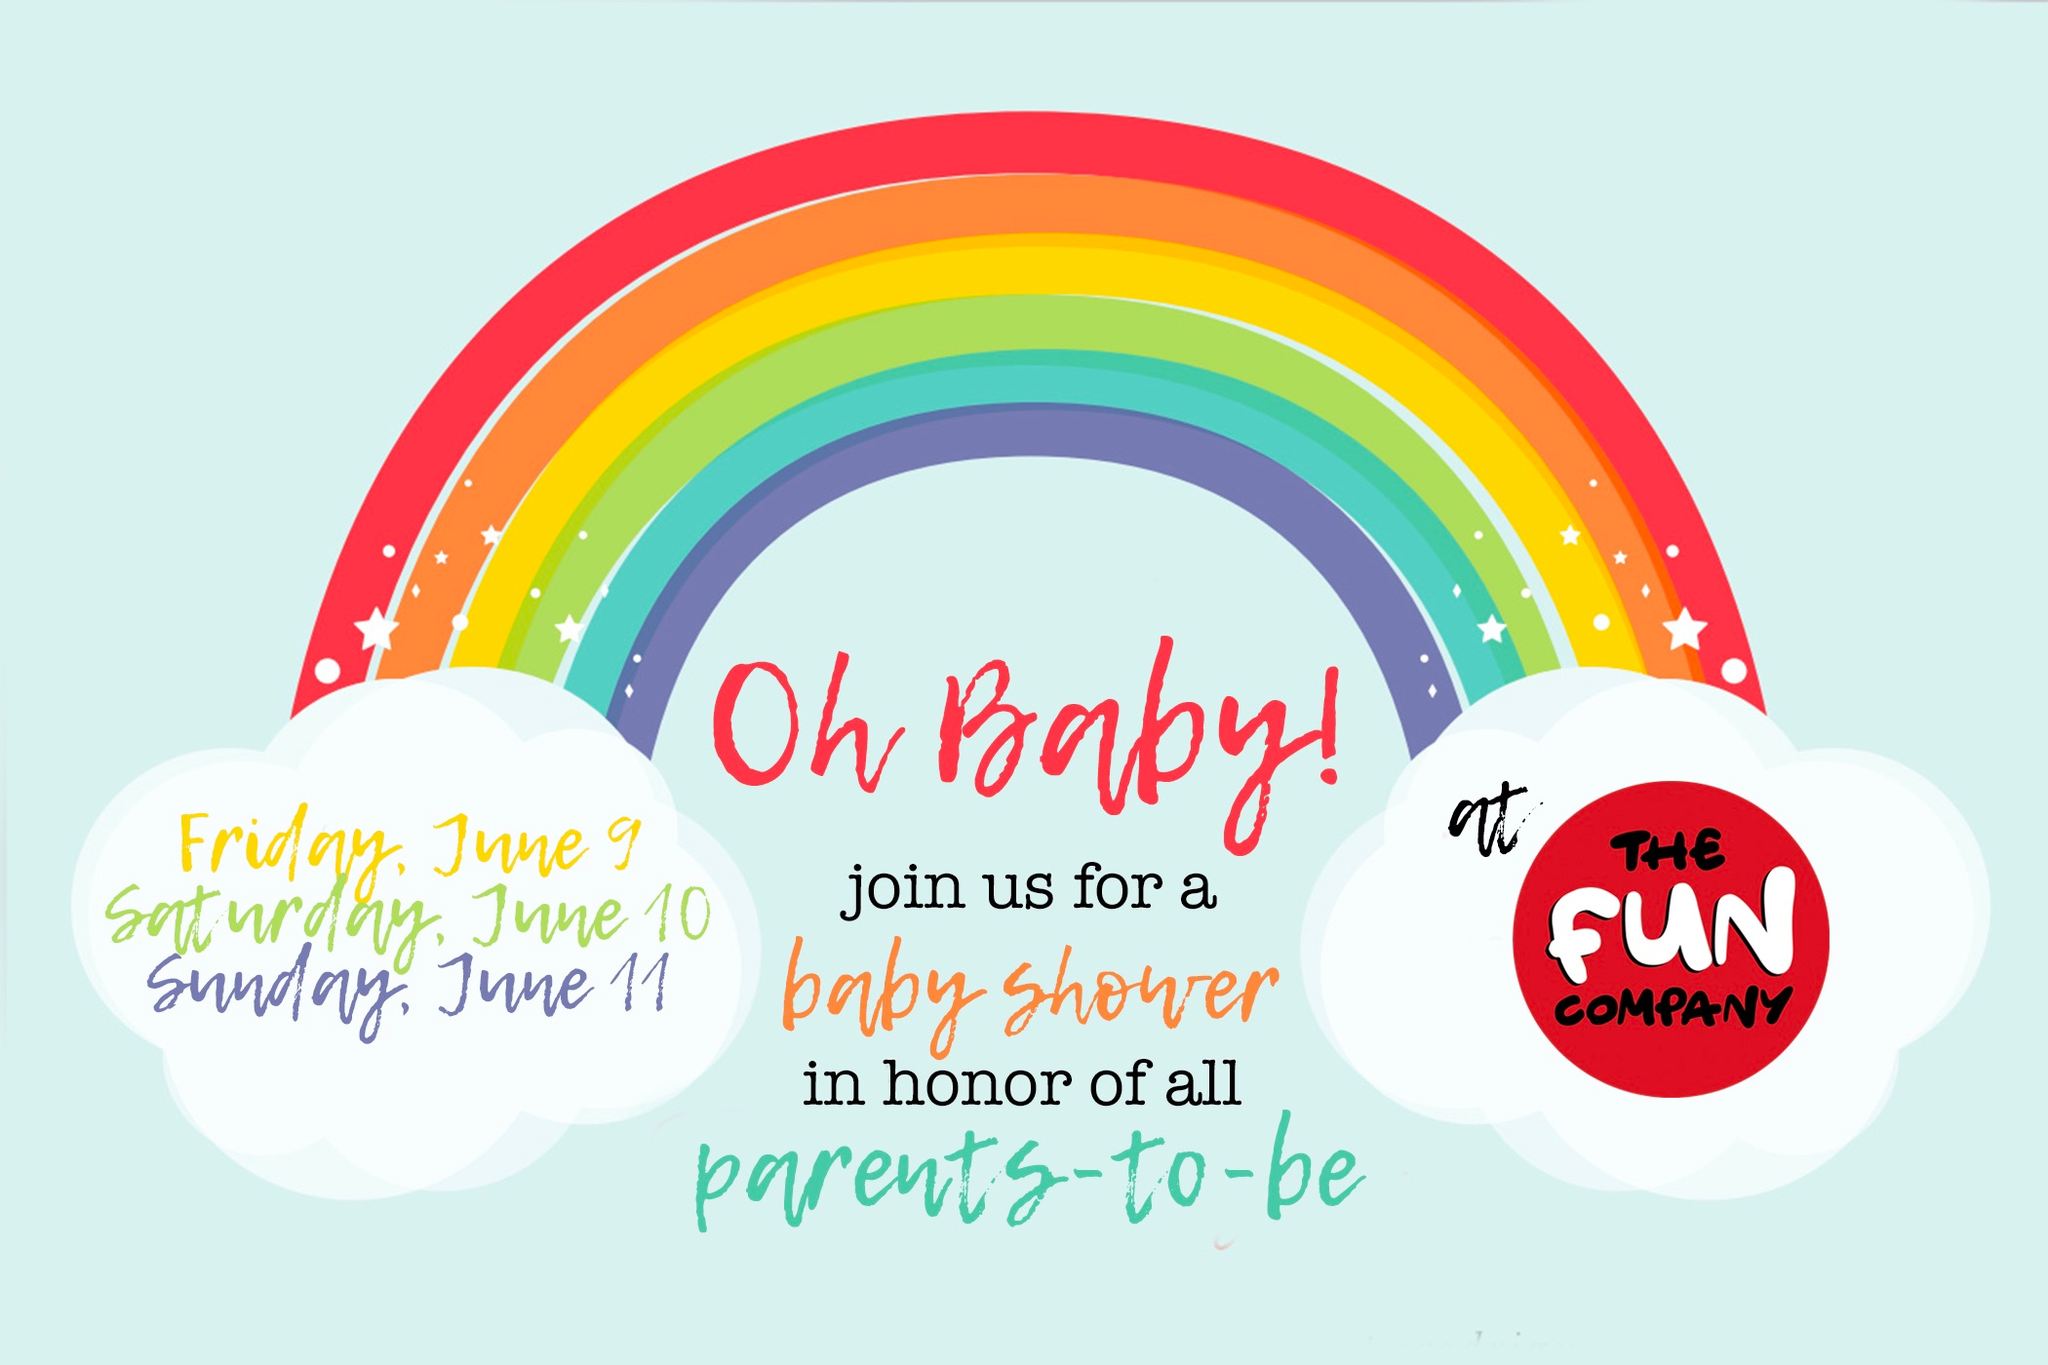 It’s a baby shower at The Fun Company!